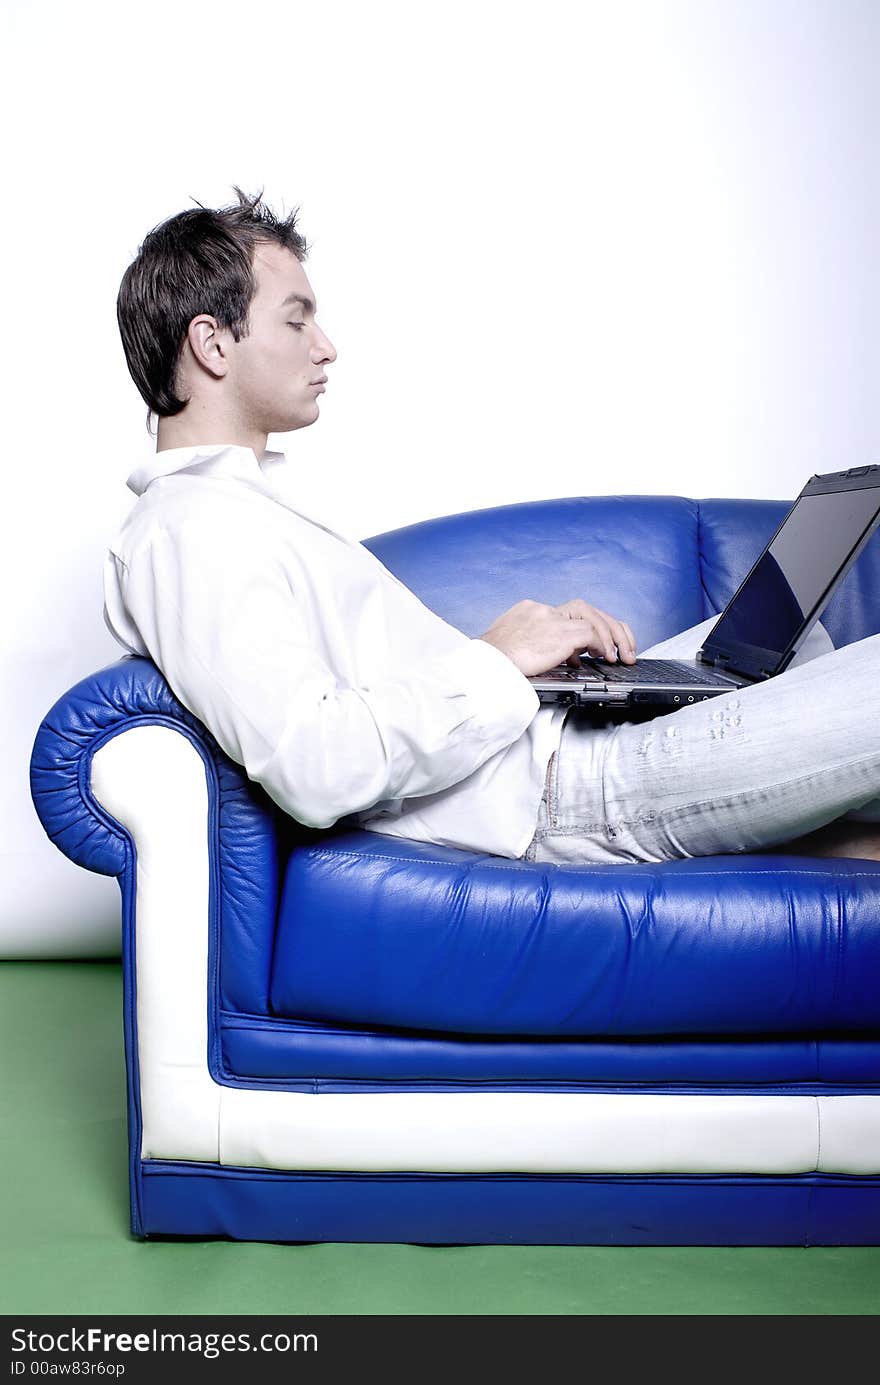 Young man comfortably sitting in a sofa using a laptop. Young man comfortably sitting in a sofa using a laptop